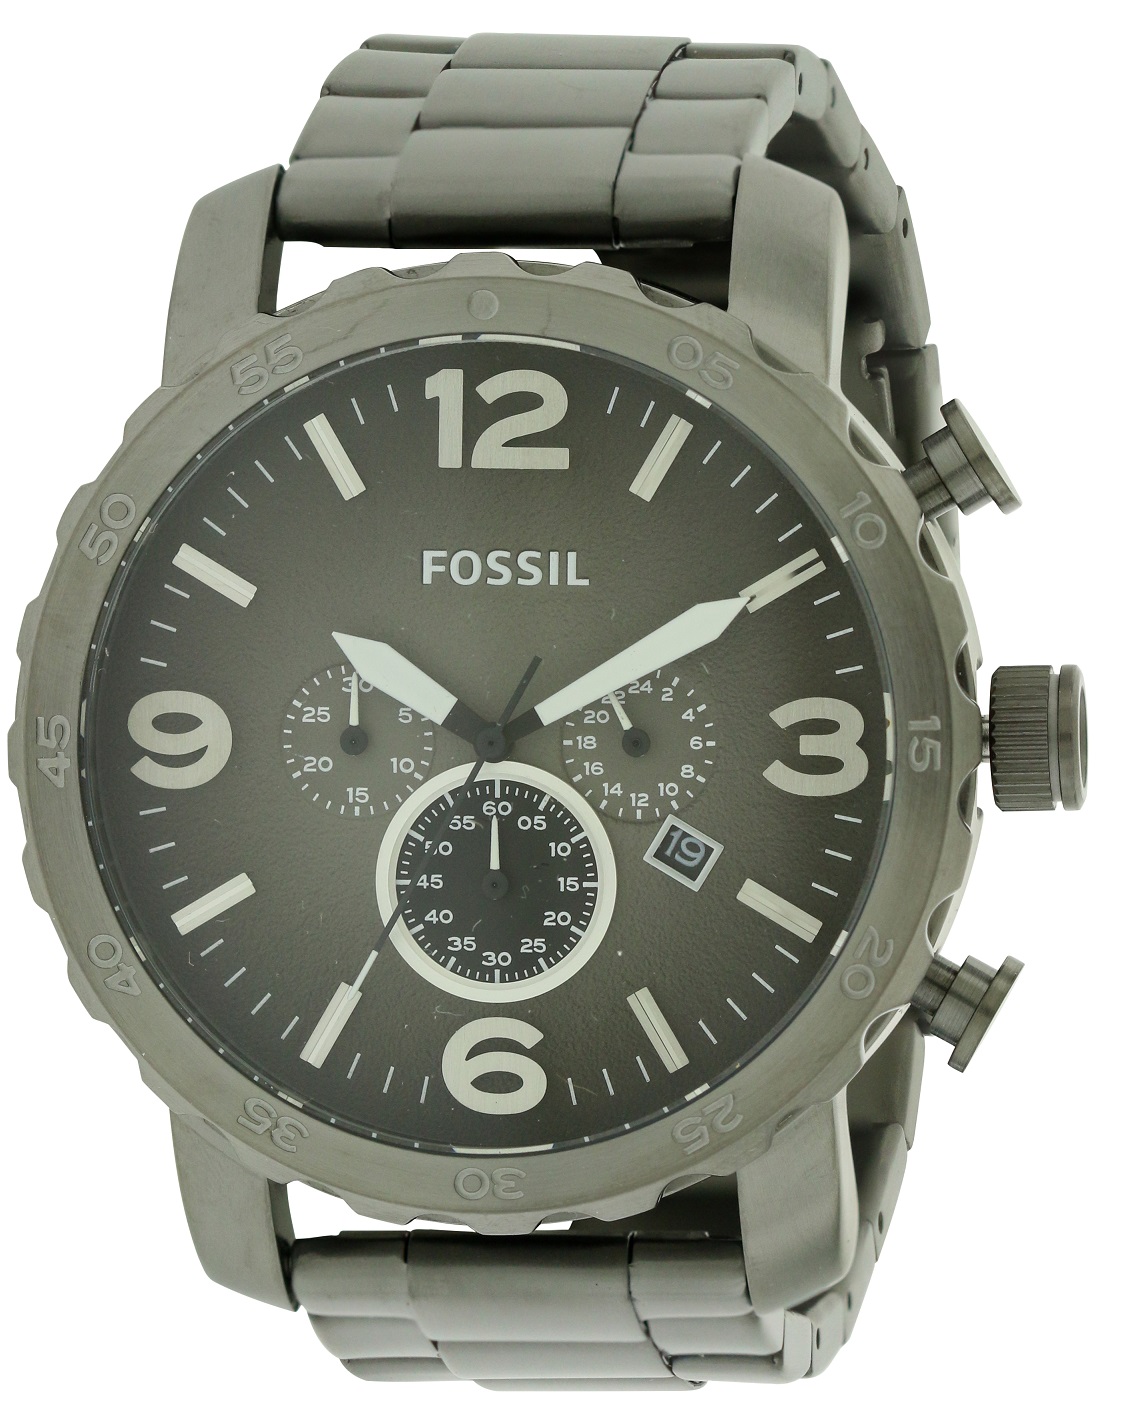 Fossil Nate Stainless Steel Chronograph Mens Watch JR1437